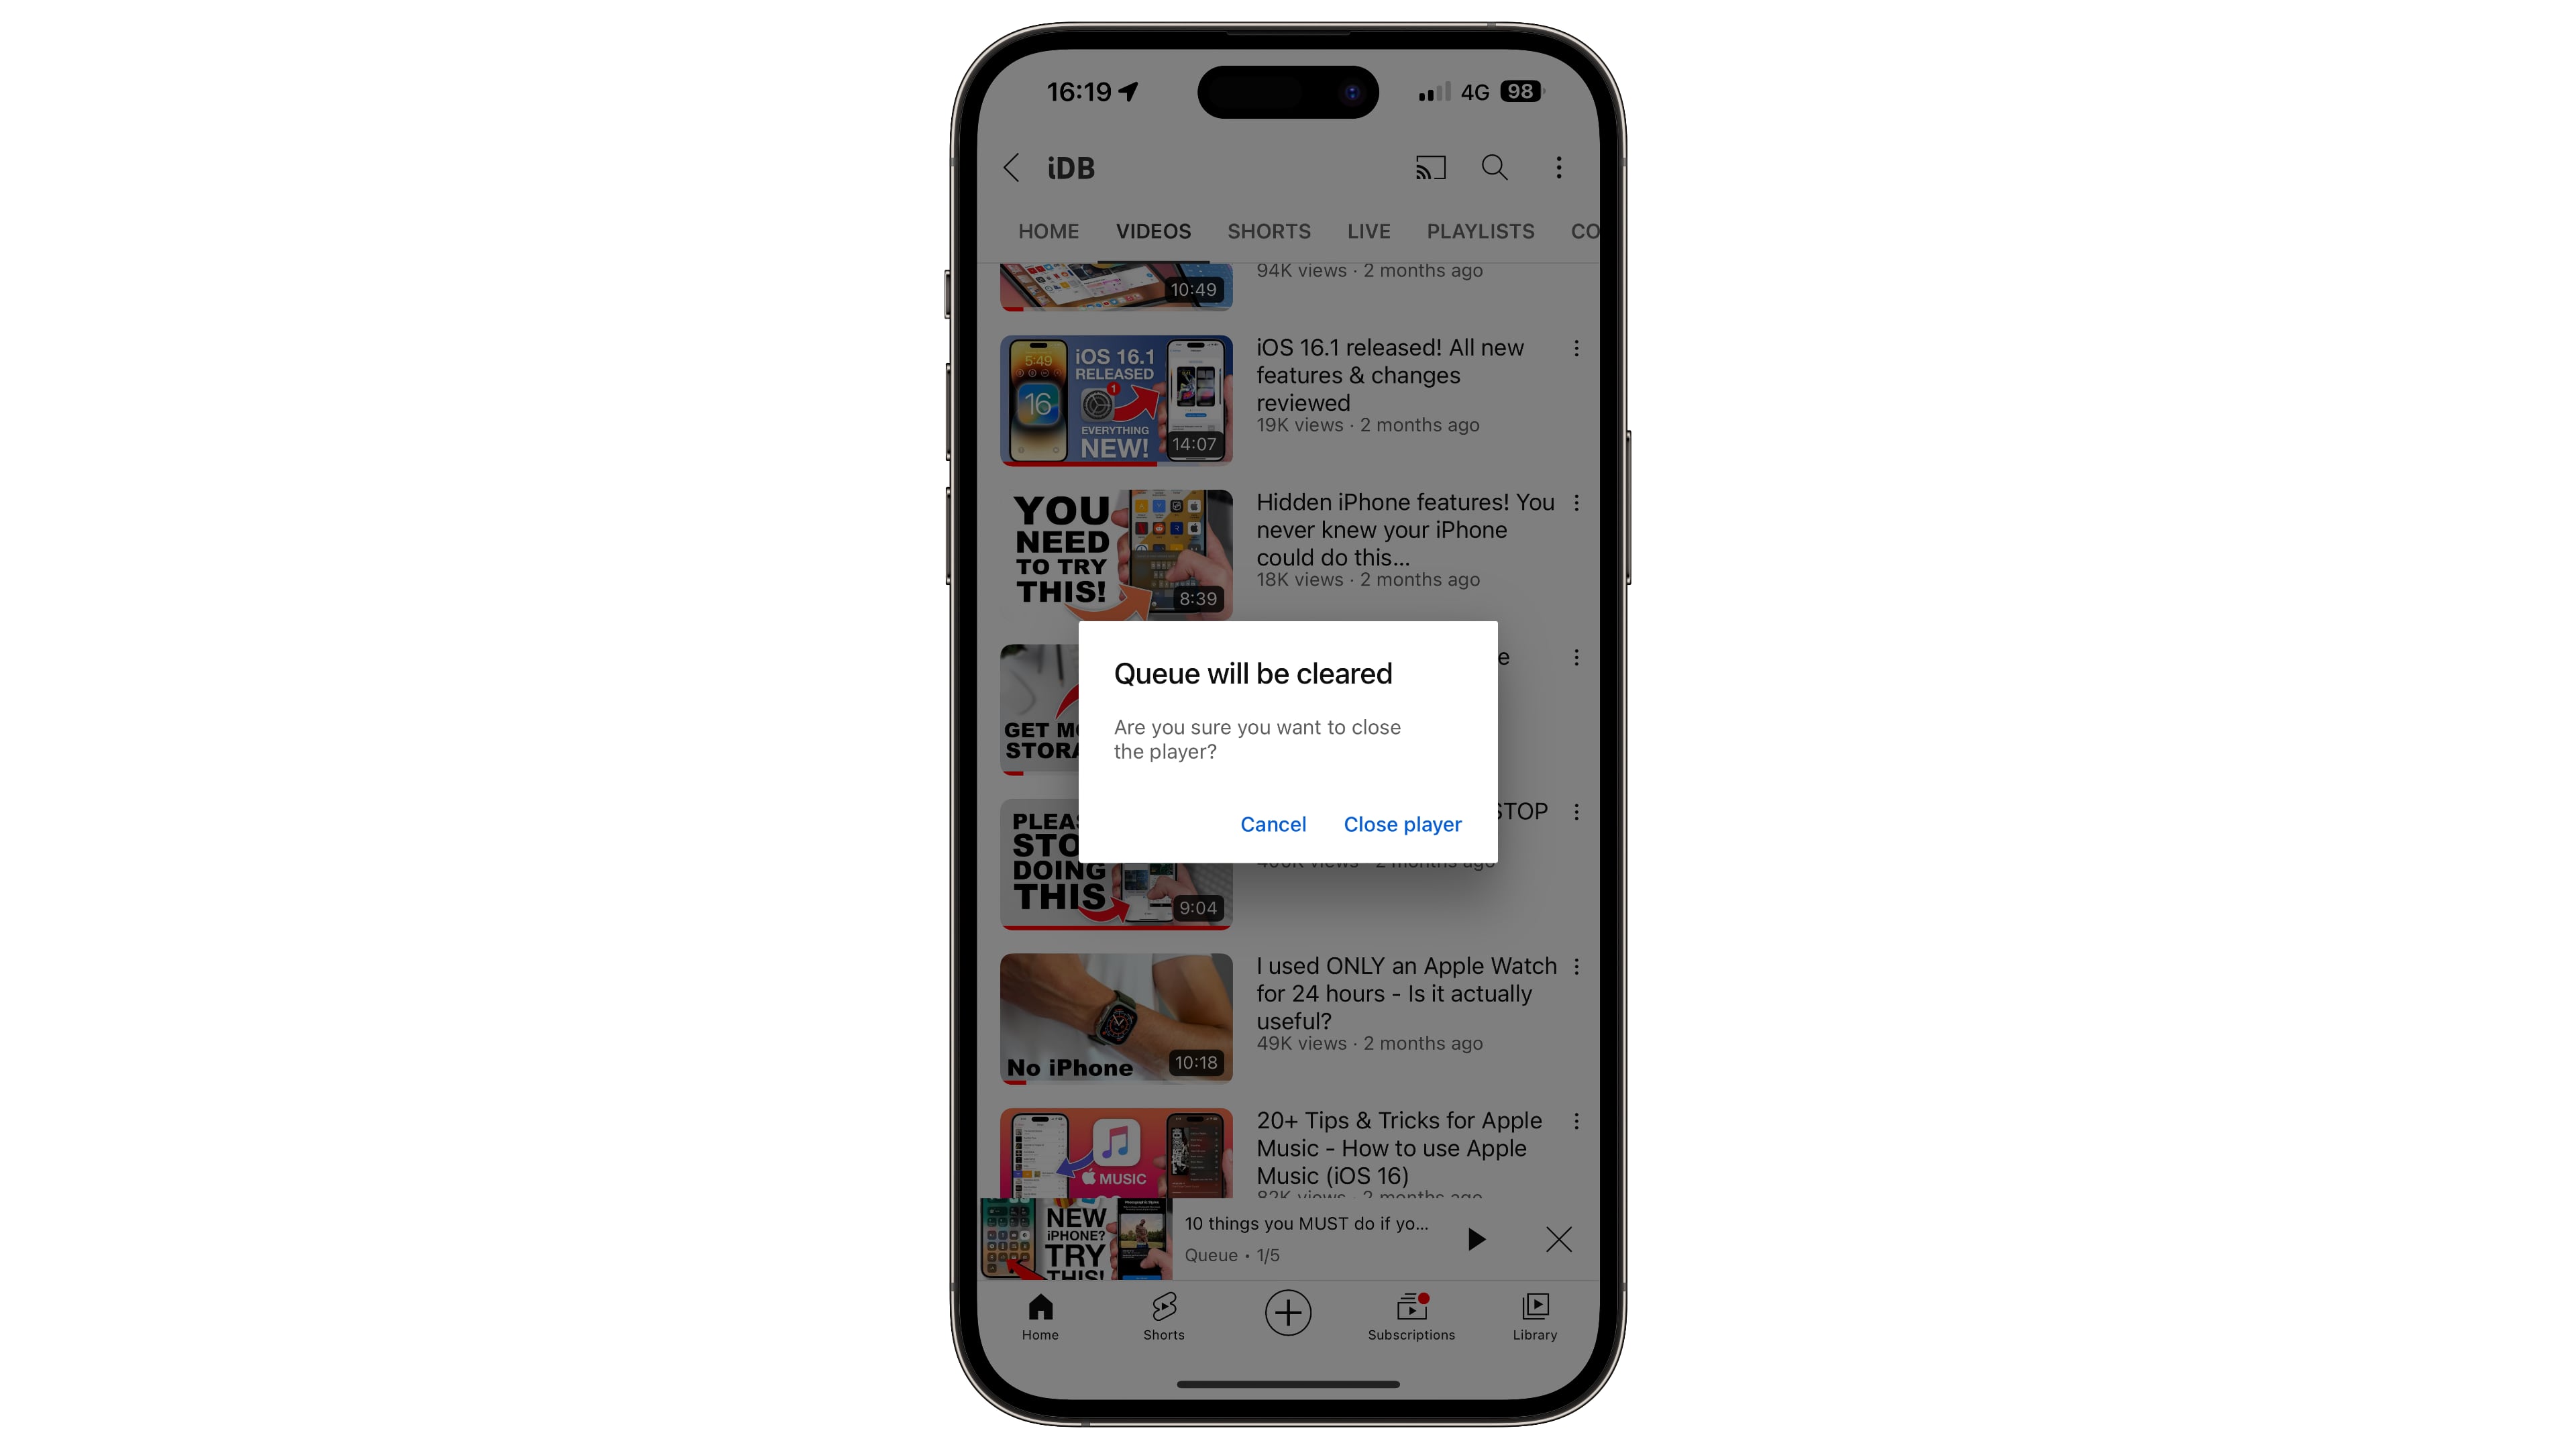 A confirmation message about clearing videos added to the YouTube Queue on iPhone